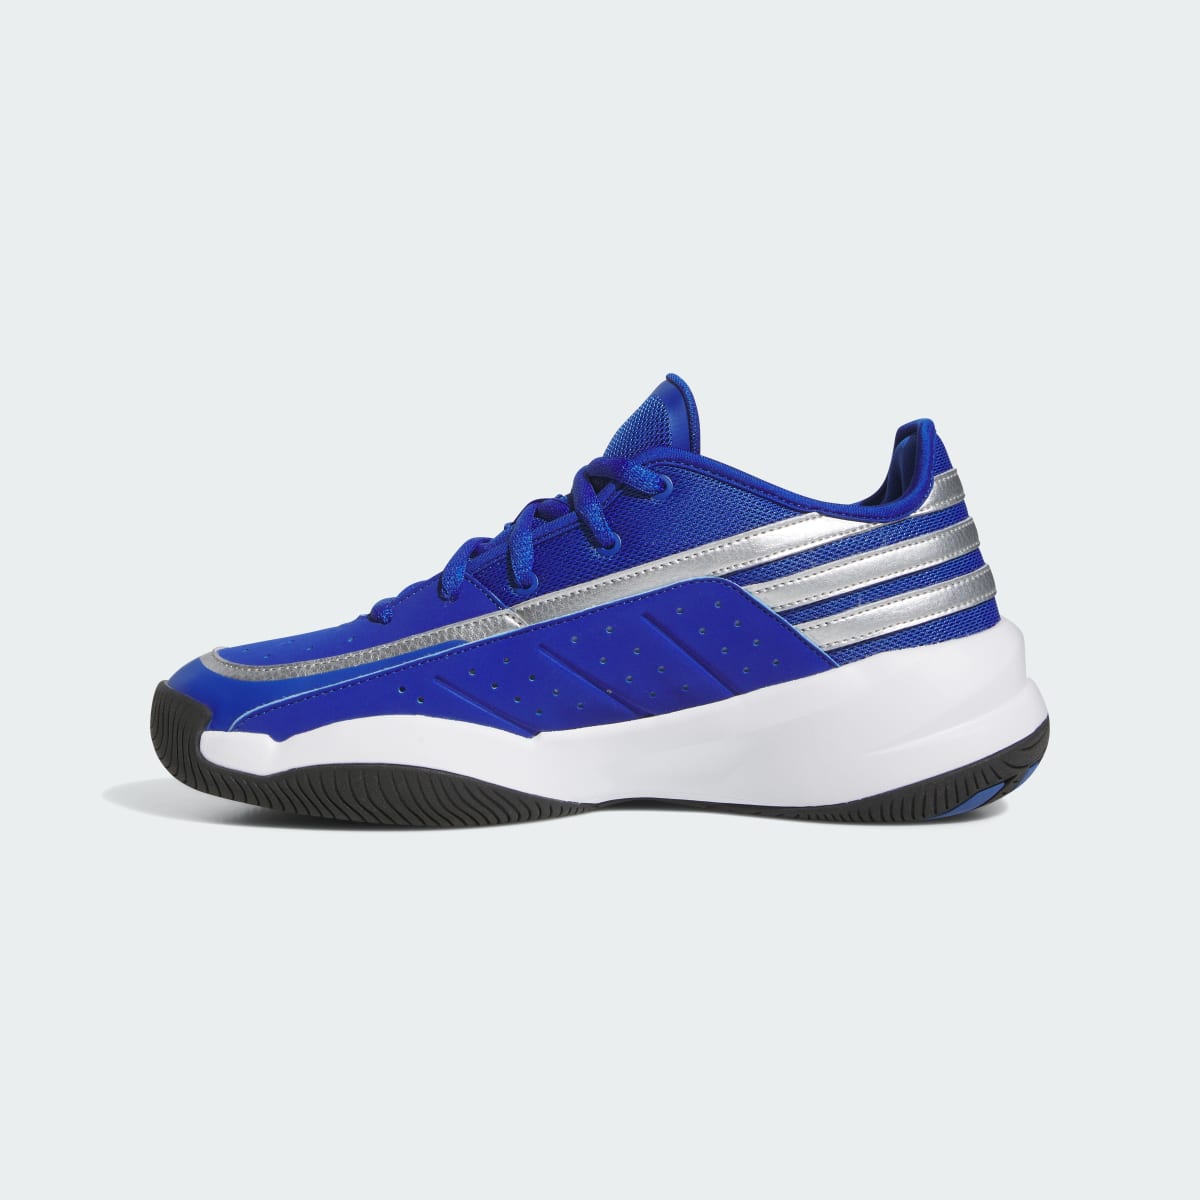 Adidas Front Court Shoes. 7